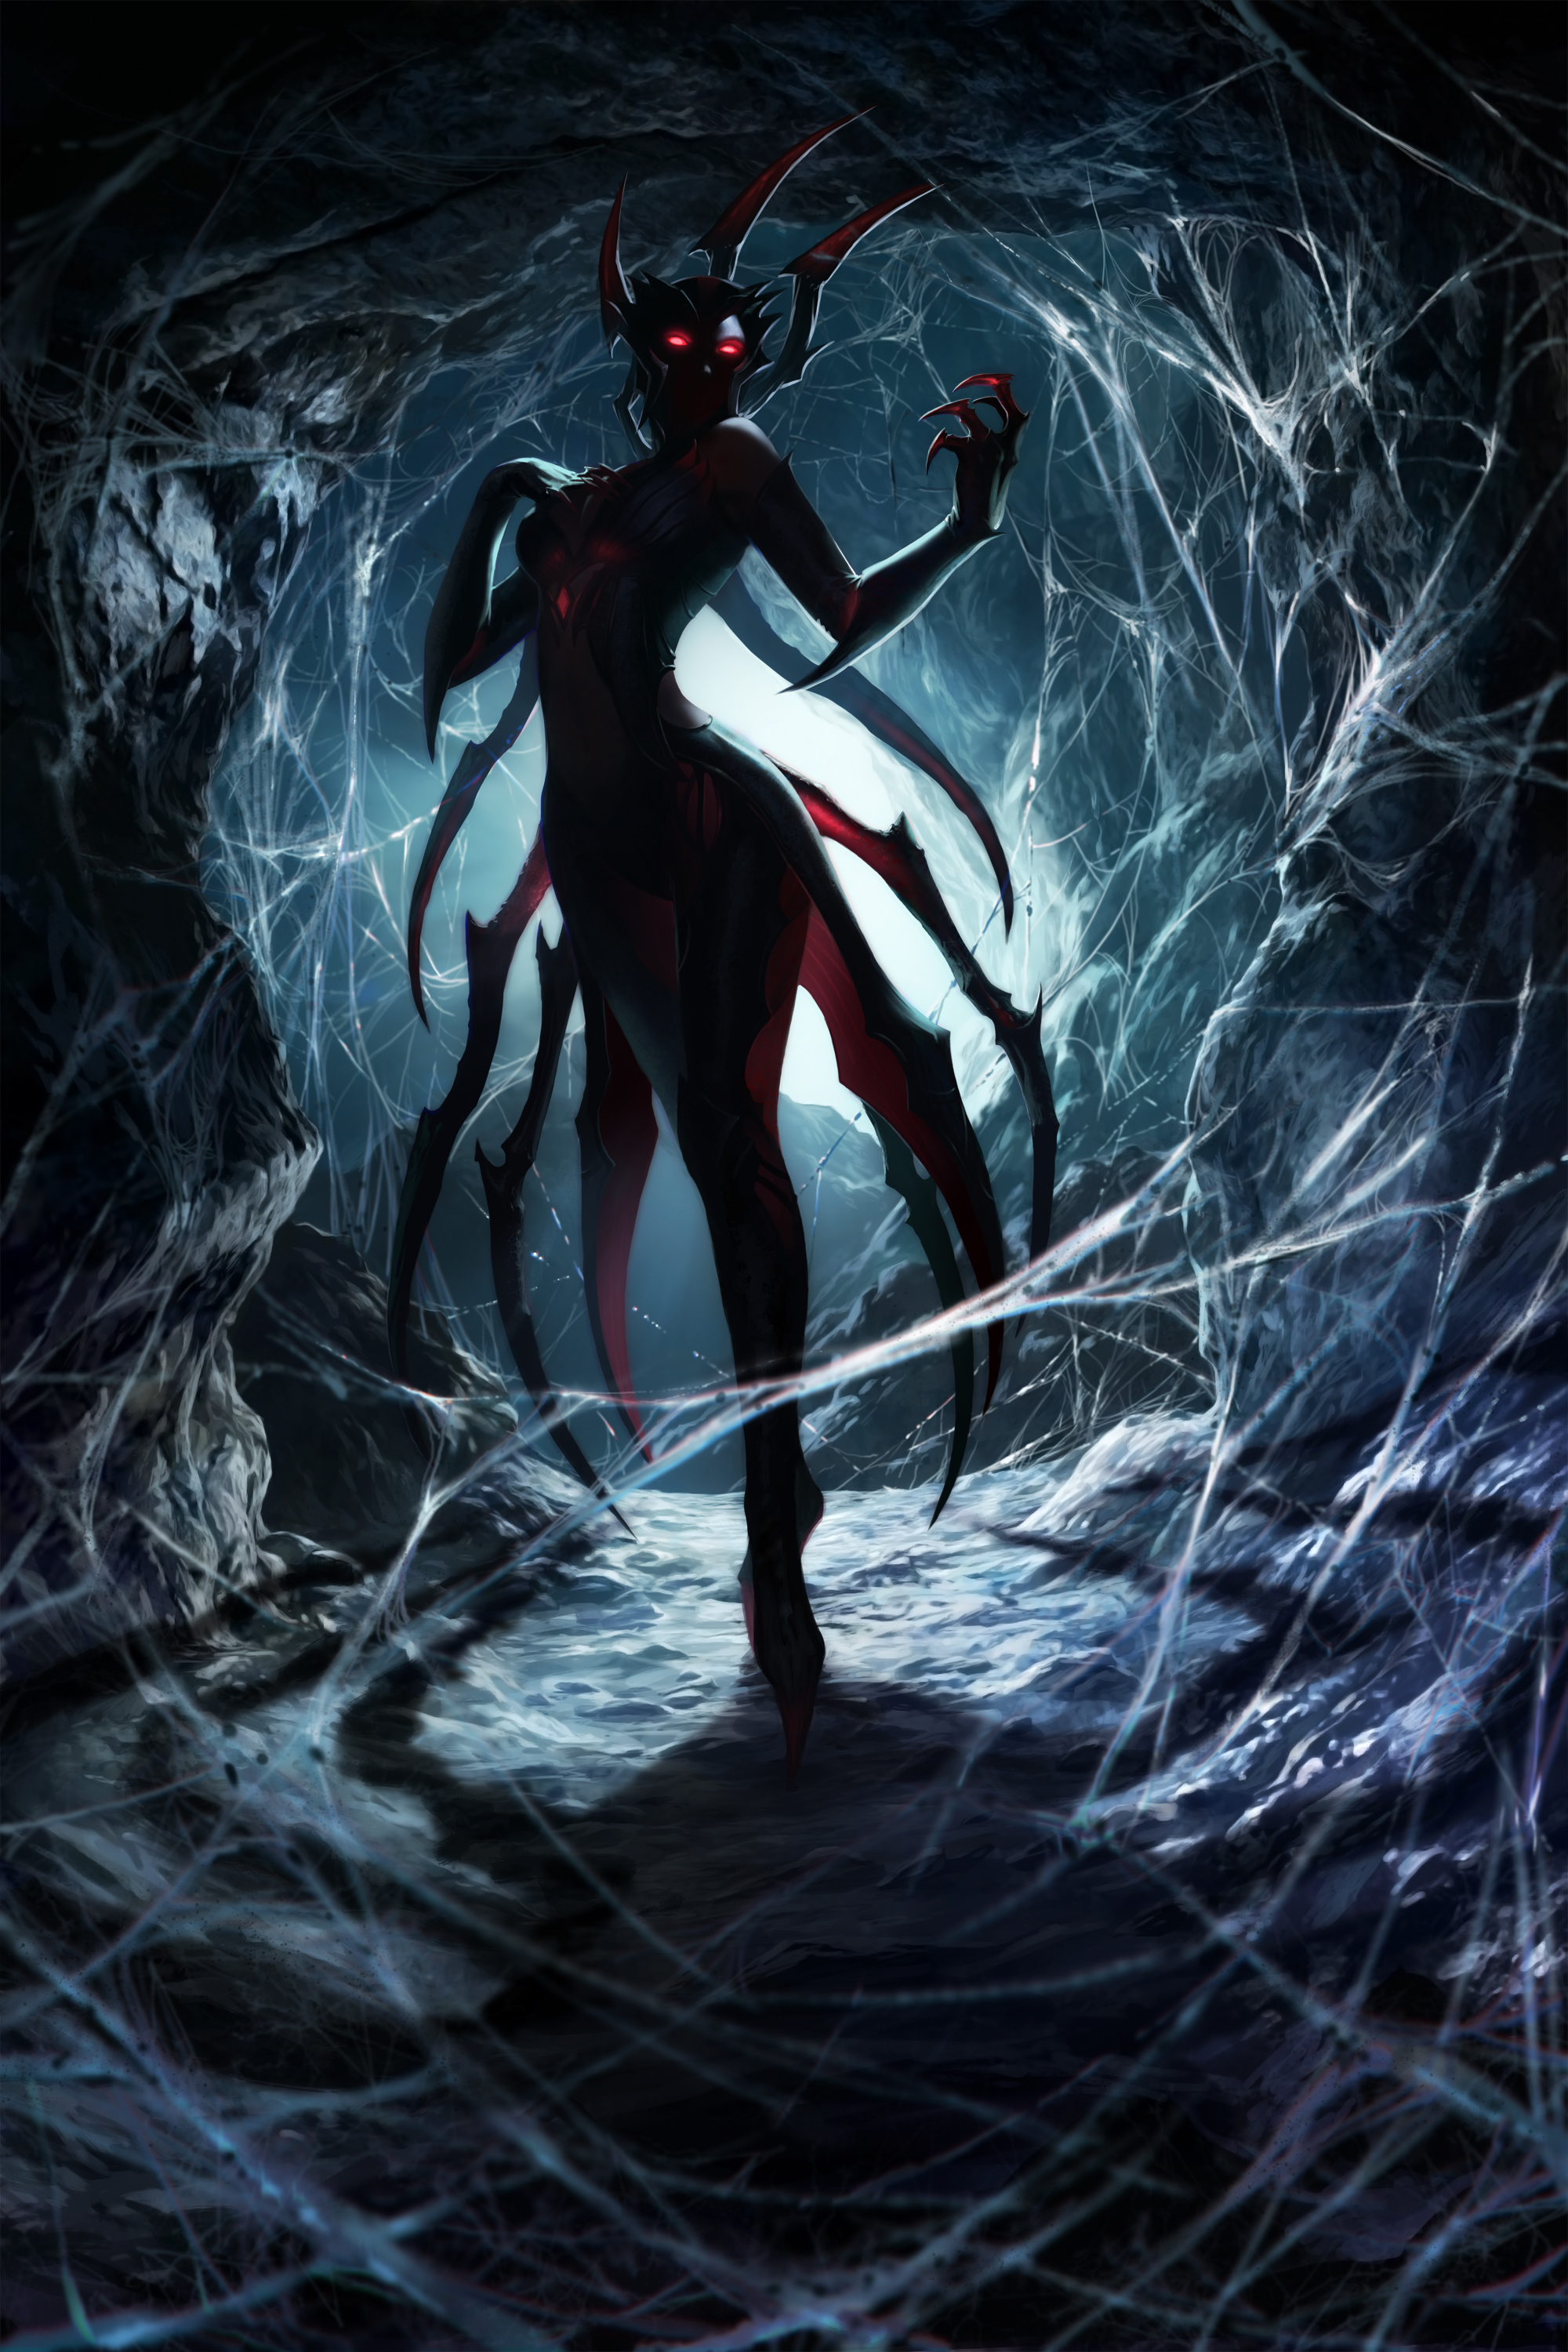 Elise The Spider Queen Revealed Posted By Neeksnaman On Wed